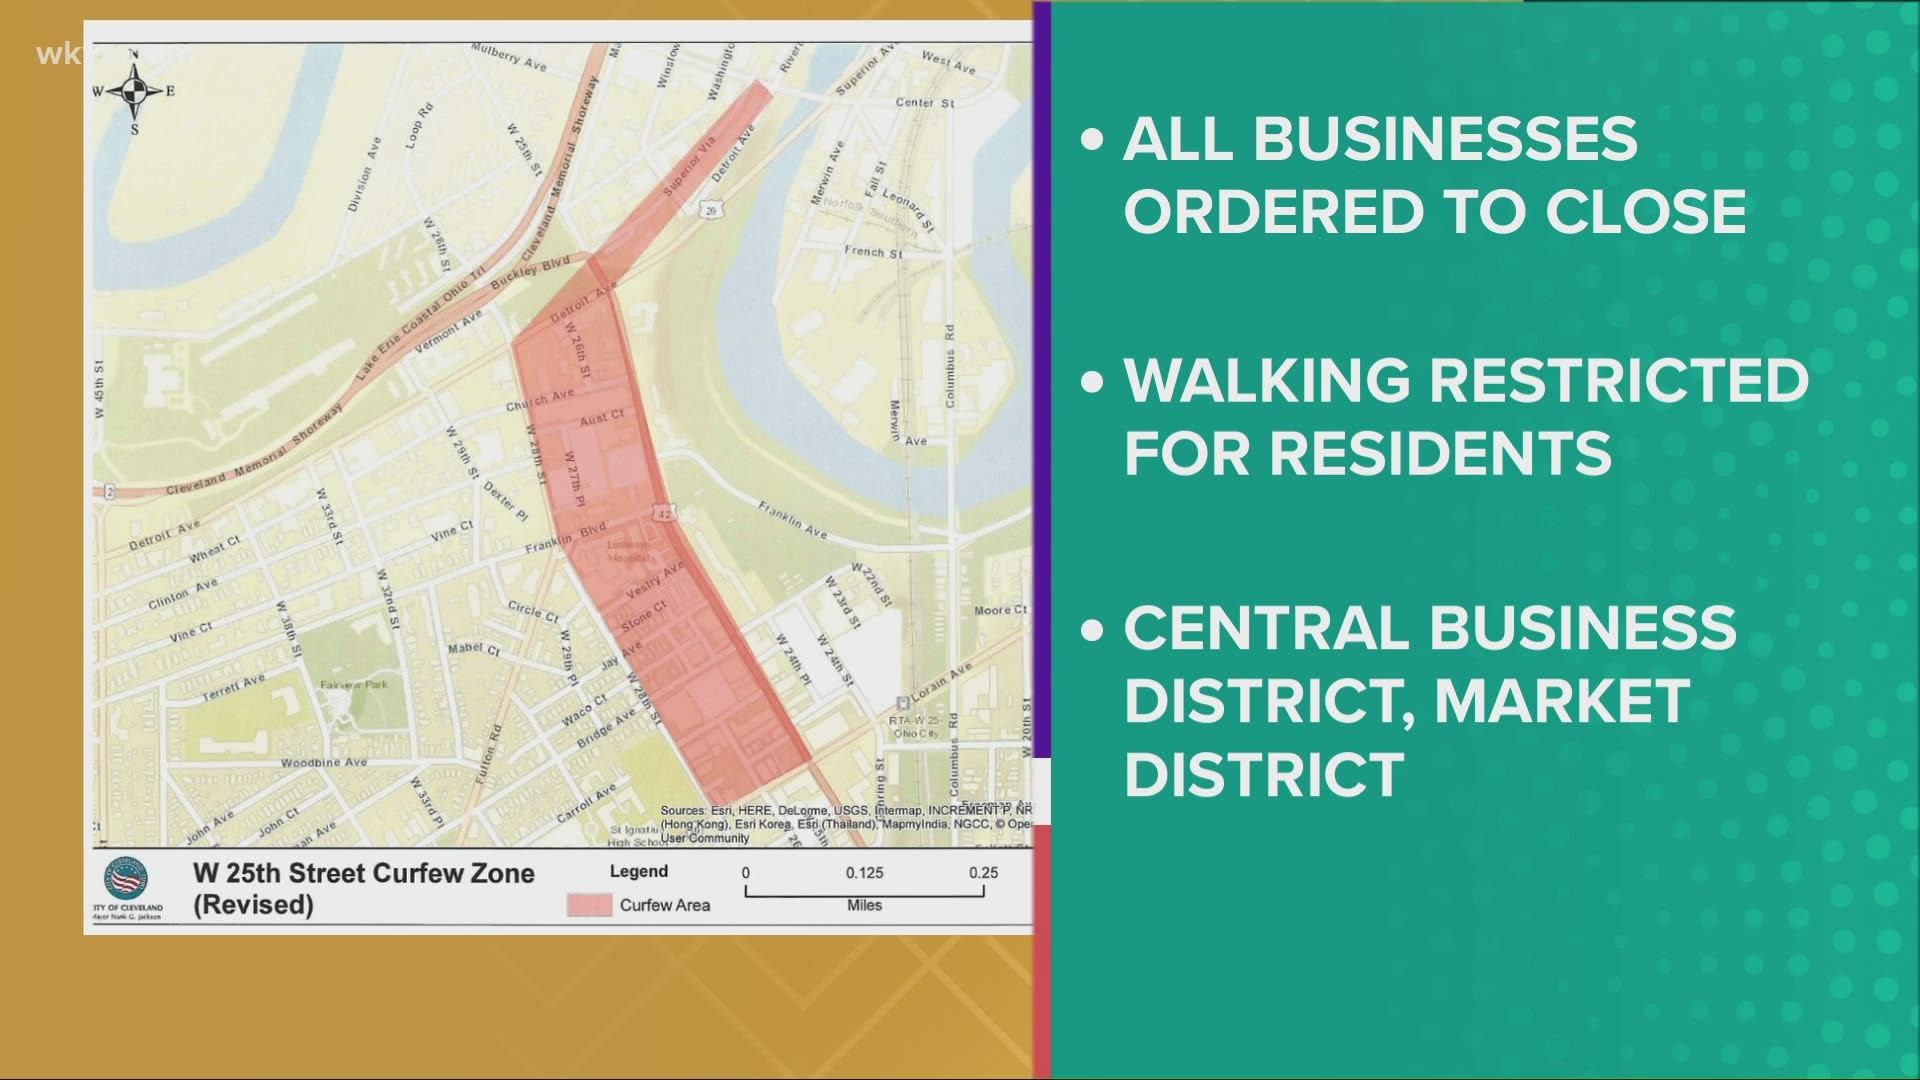 All businesses are ordered to be closed.  Walking is also restricted for residents.  The curfew ends tomorrow night at 8:00 p.m.